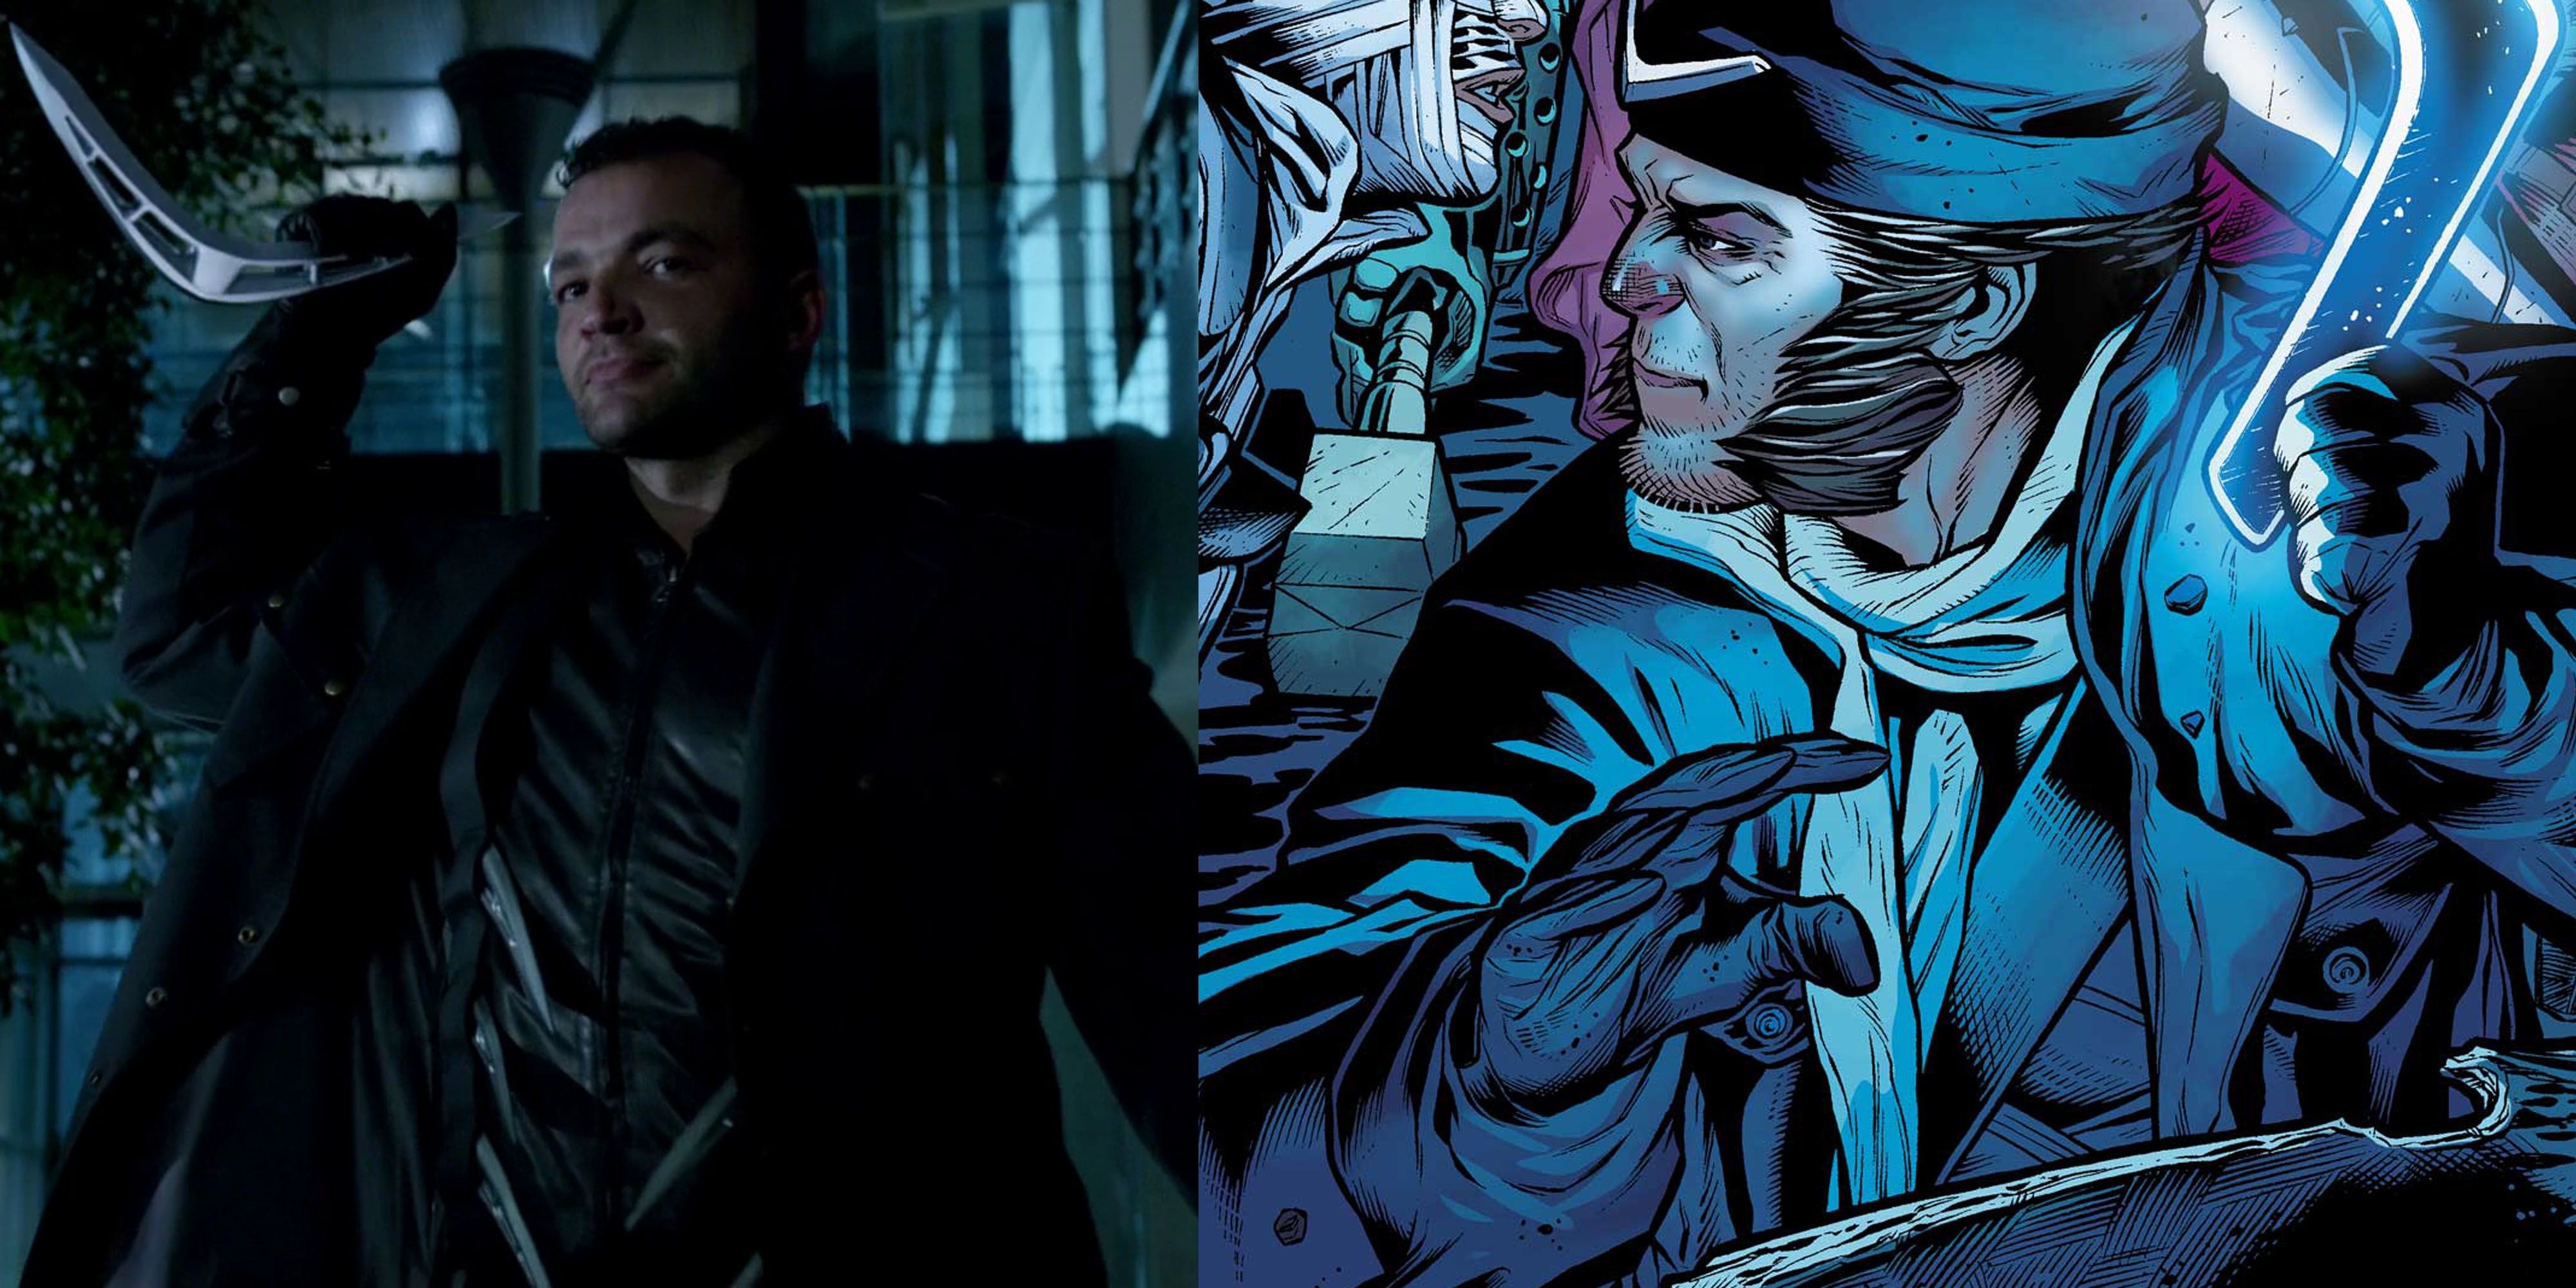 Split image of Captain Boomerang from Arrow series and DC Comics